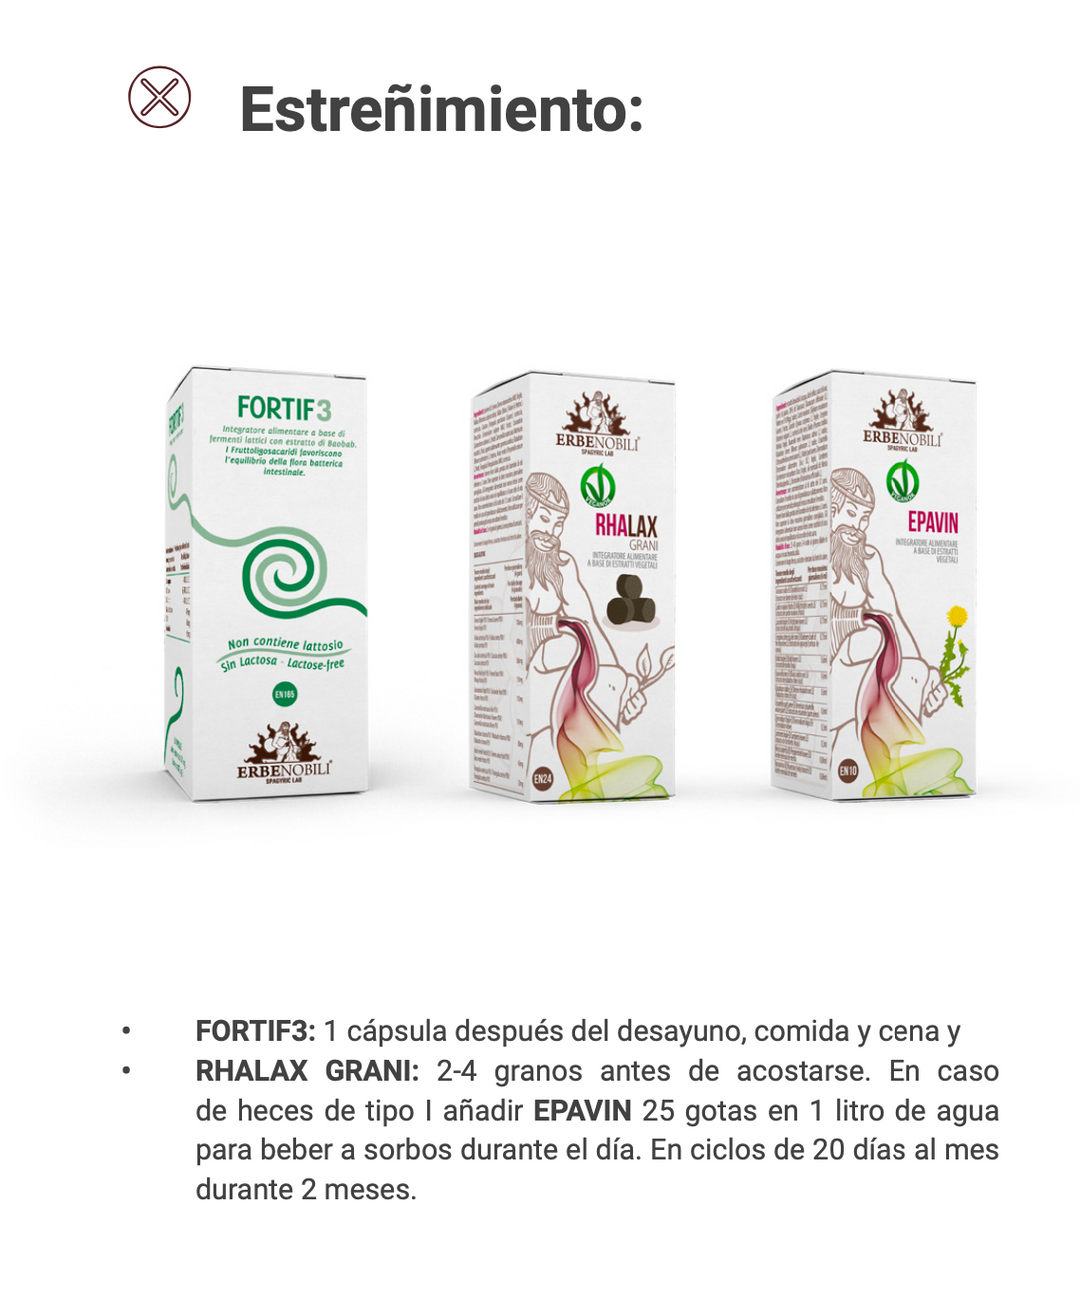 Suplemento Natural - Toxinas Alimentares | FORTIF3, 30CPS